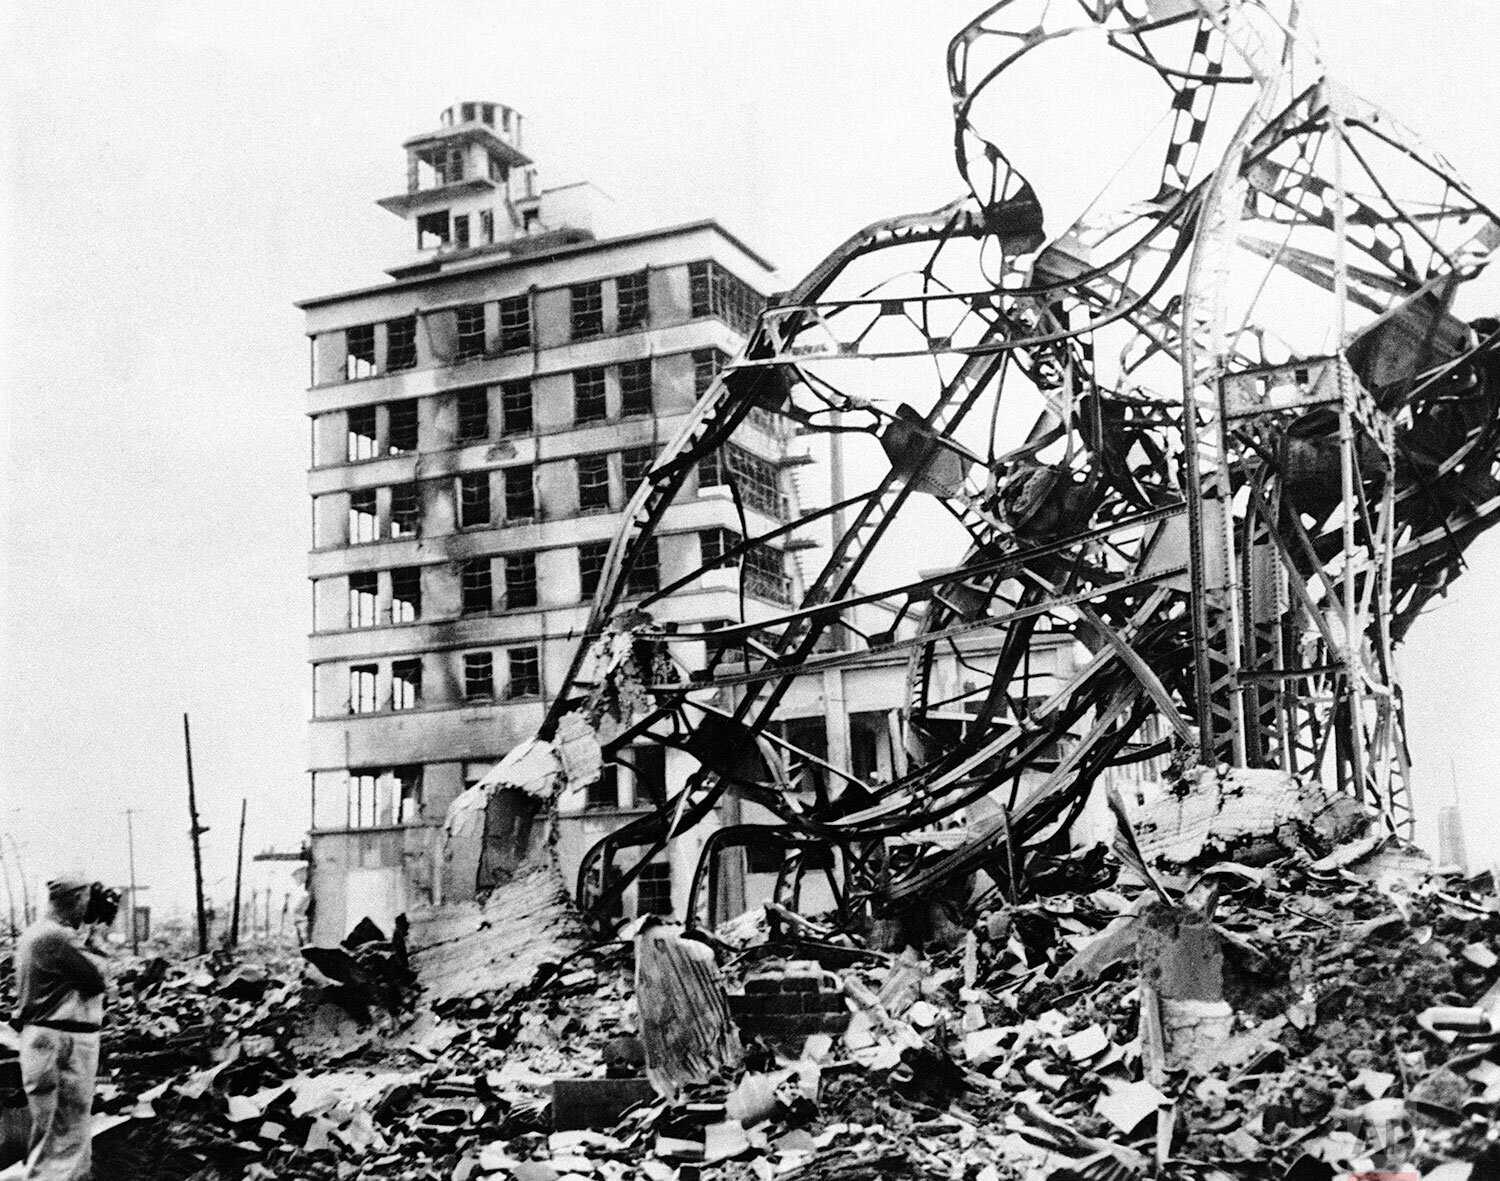  A twisted mass of steel, marks the site of a large building in the industrial centre of atomized Hiroshima, Japan, on Sept. 13, 1945, directly behind, in grim contrast, a partly demolished building towers up, amid acres of gutted and fire blackened 